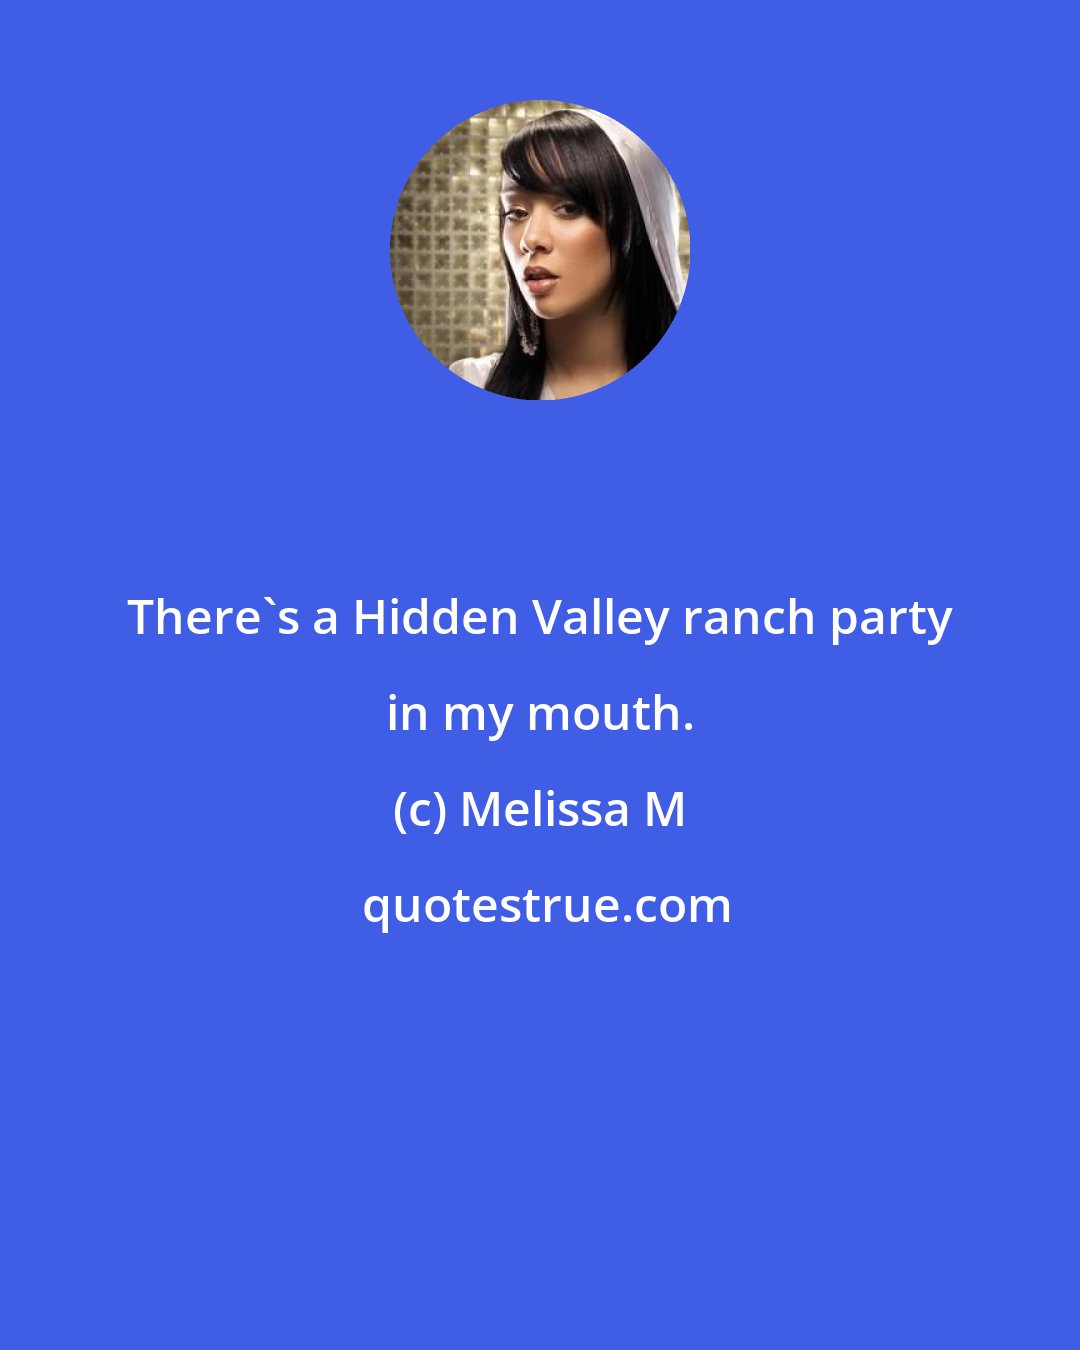 Melissa M: There's a Hidden Valley ranch party in my mouth.